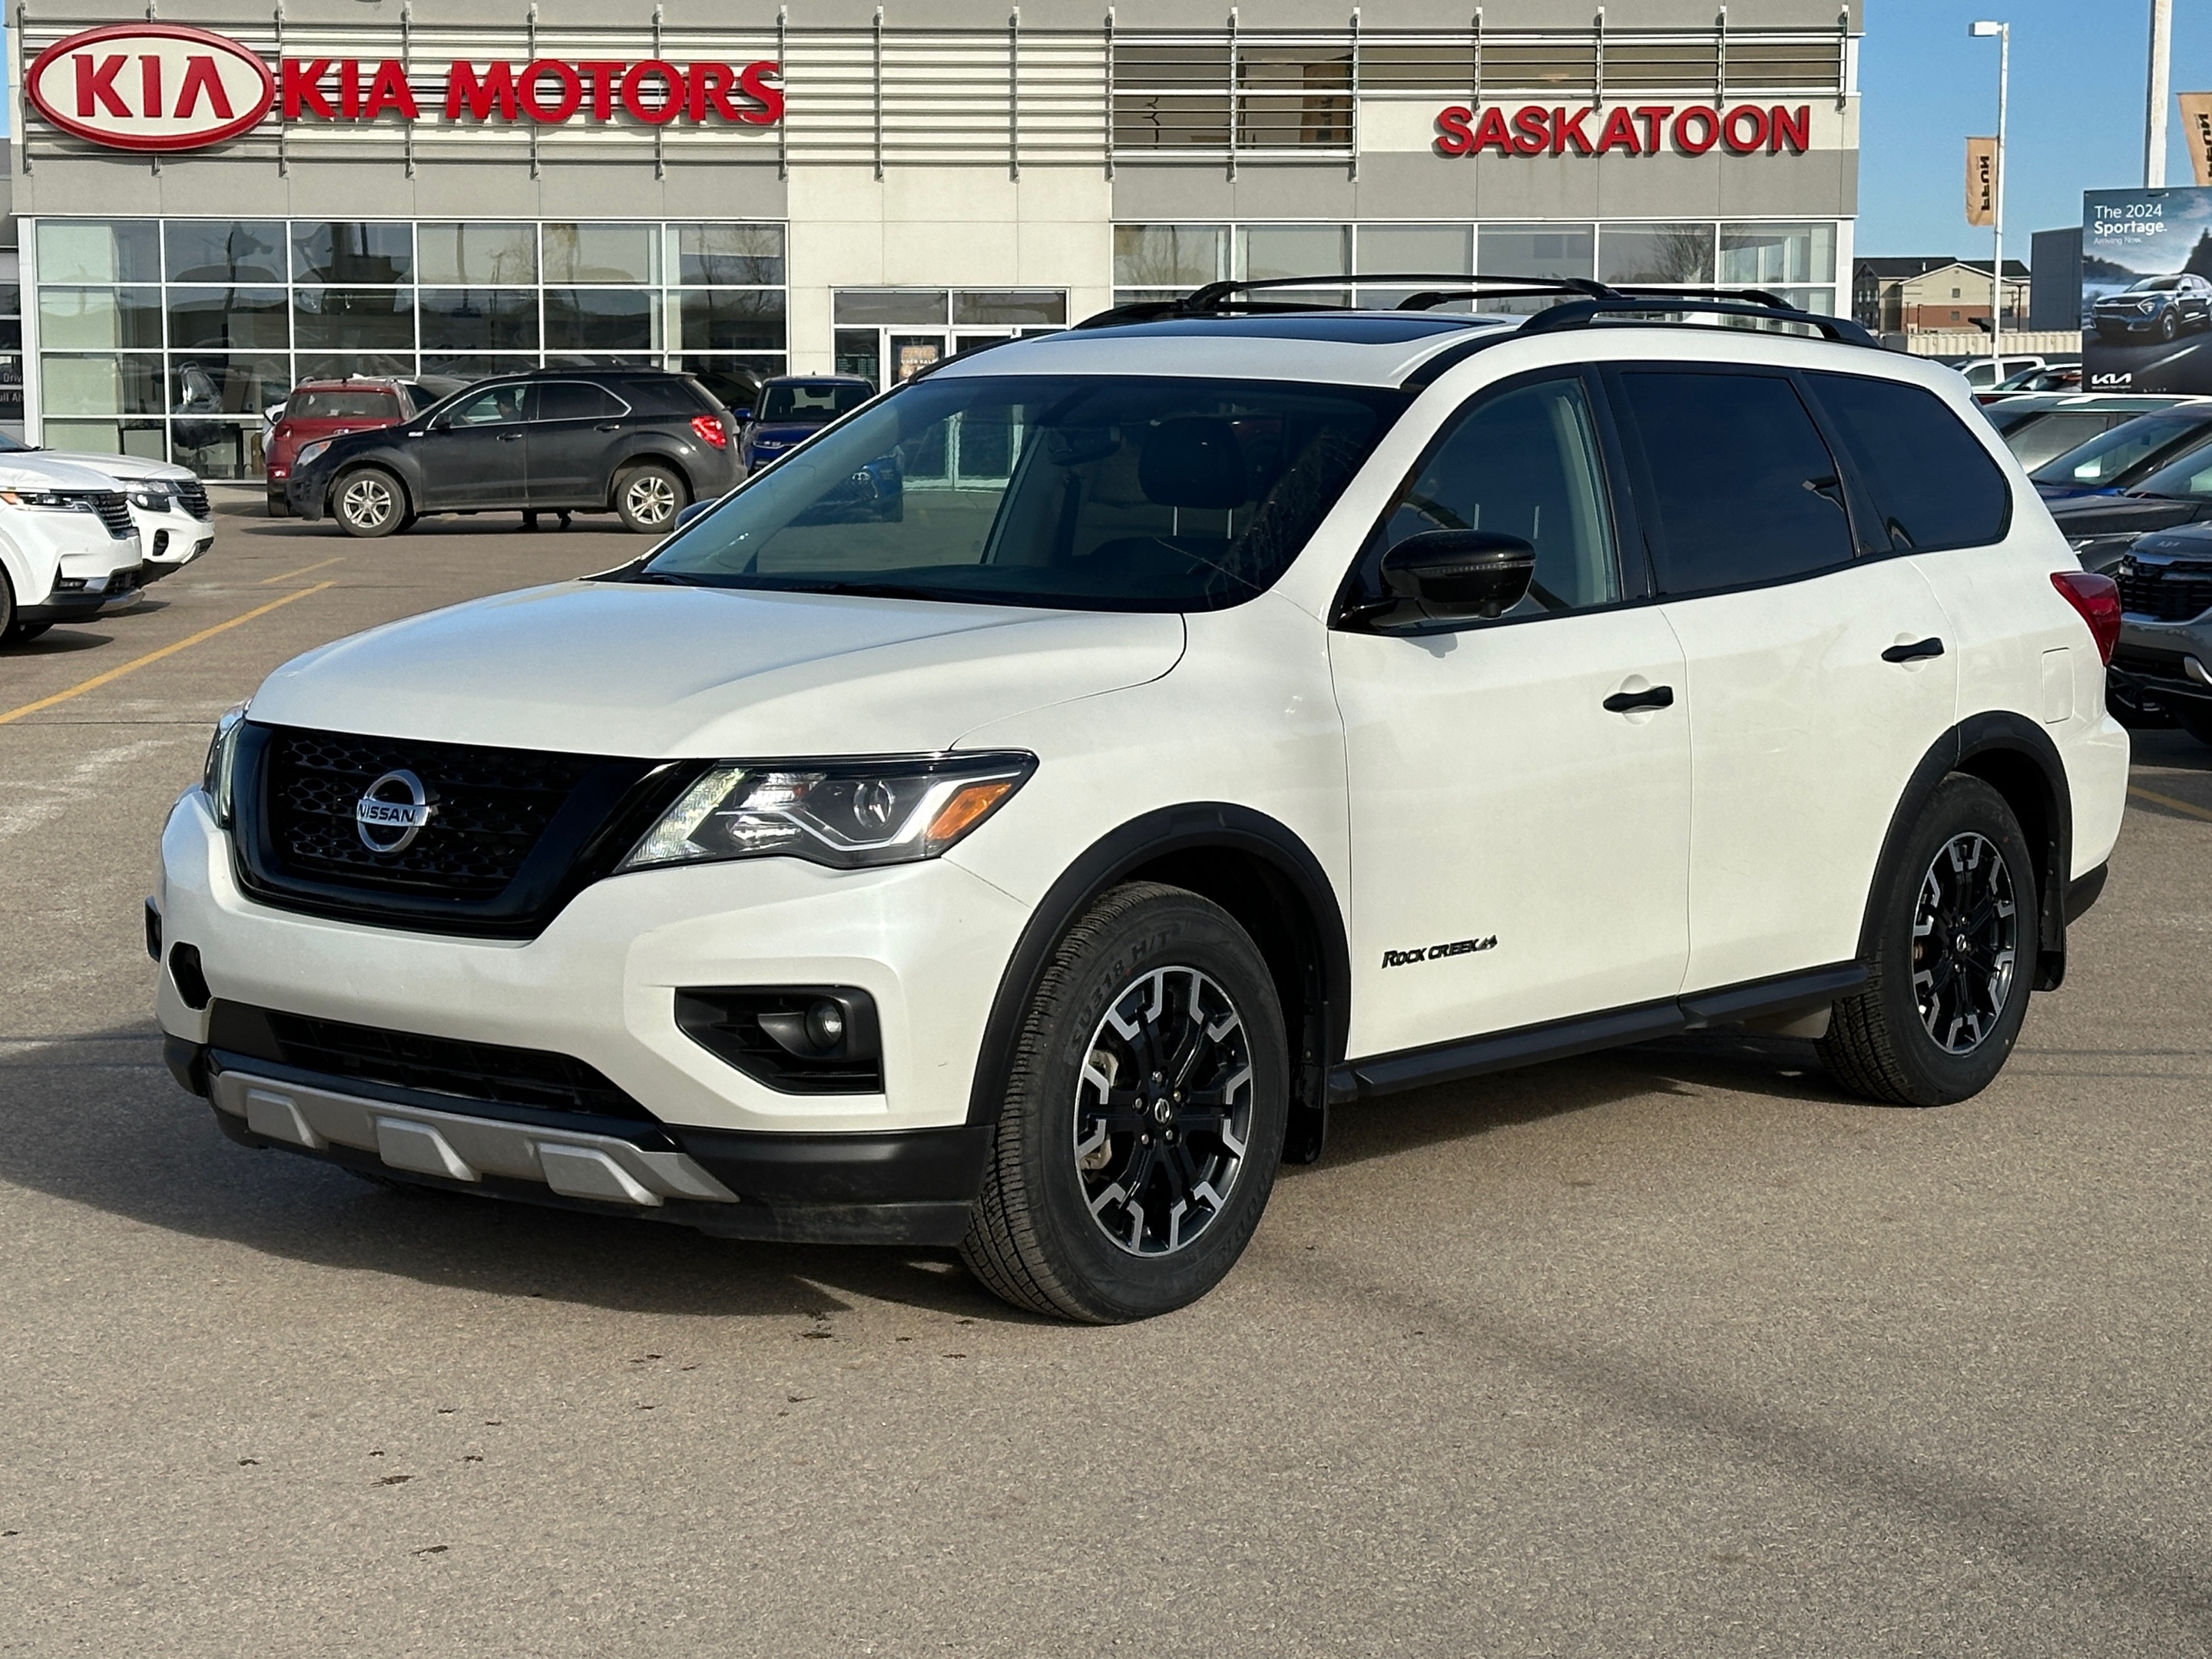 2020 Nissan Pathfinder SL Rock Creek, ACCIDENT FREE, FULLY LOADED!!! 